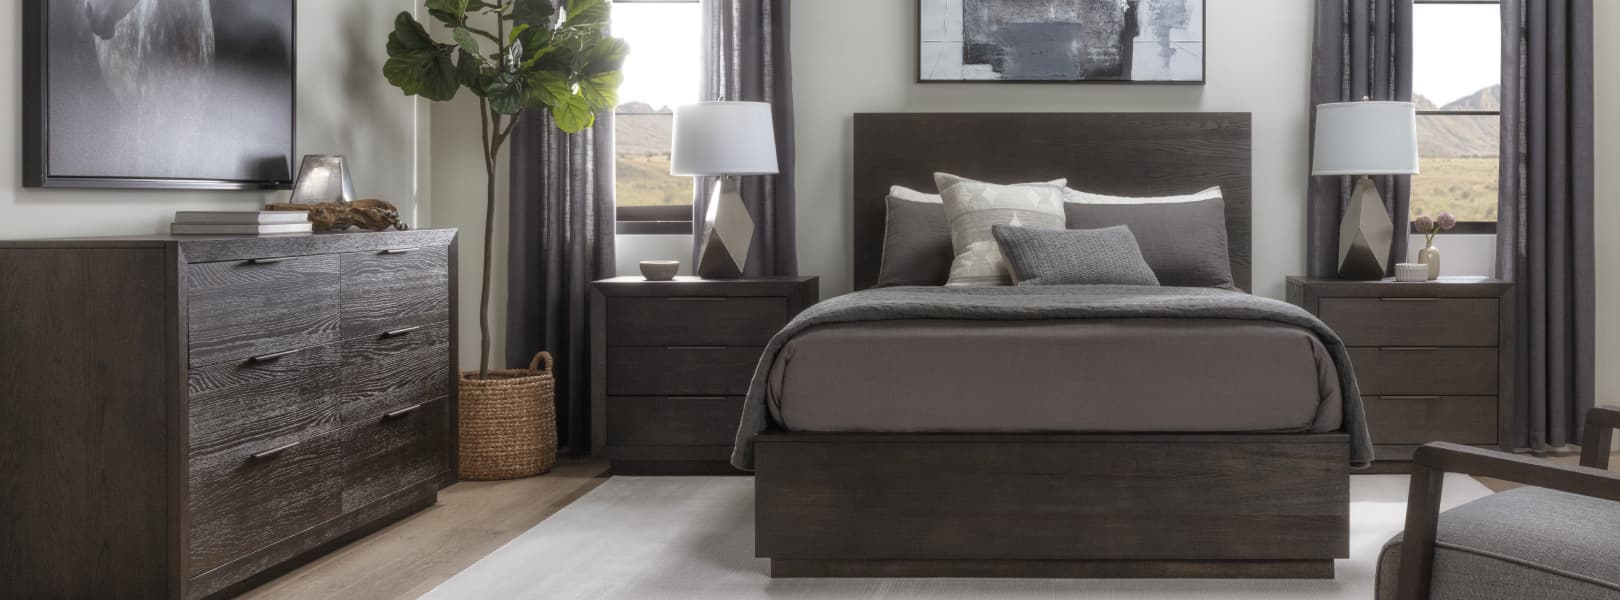 common mistakes to avoid when styling a king size bed